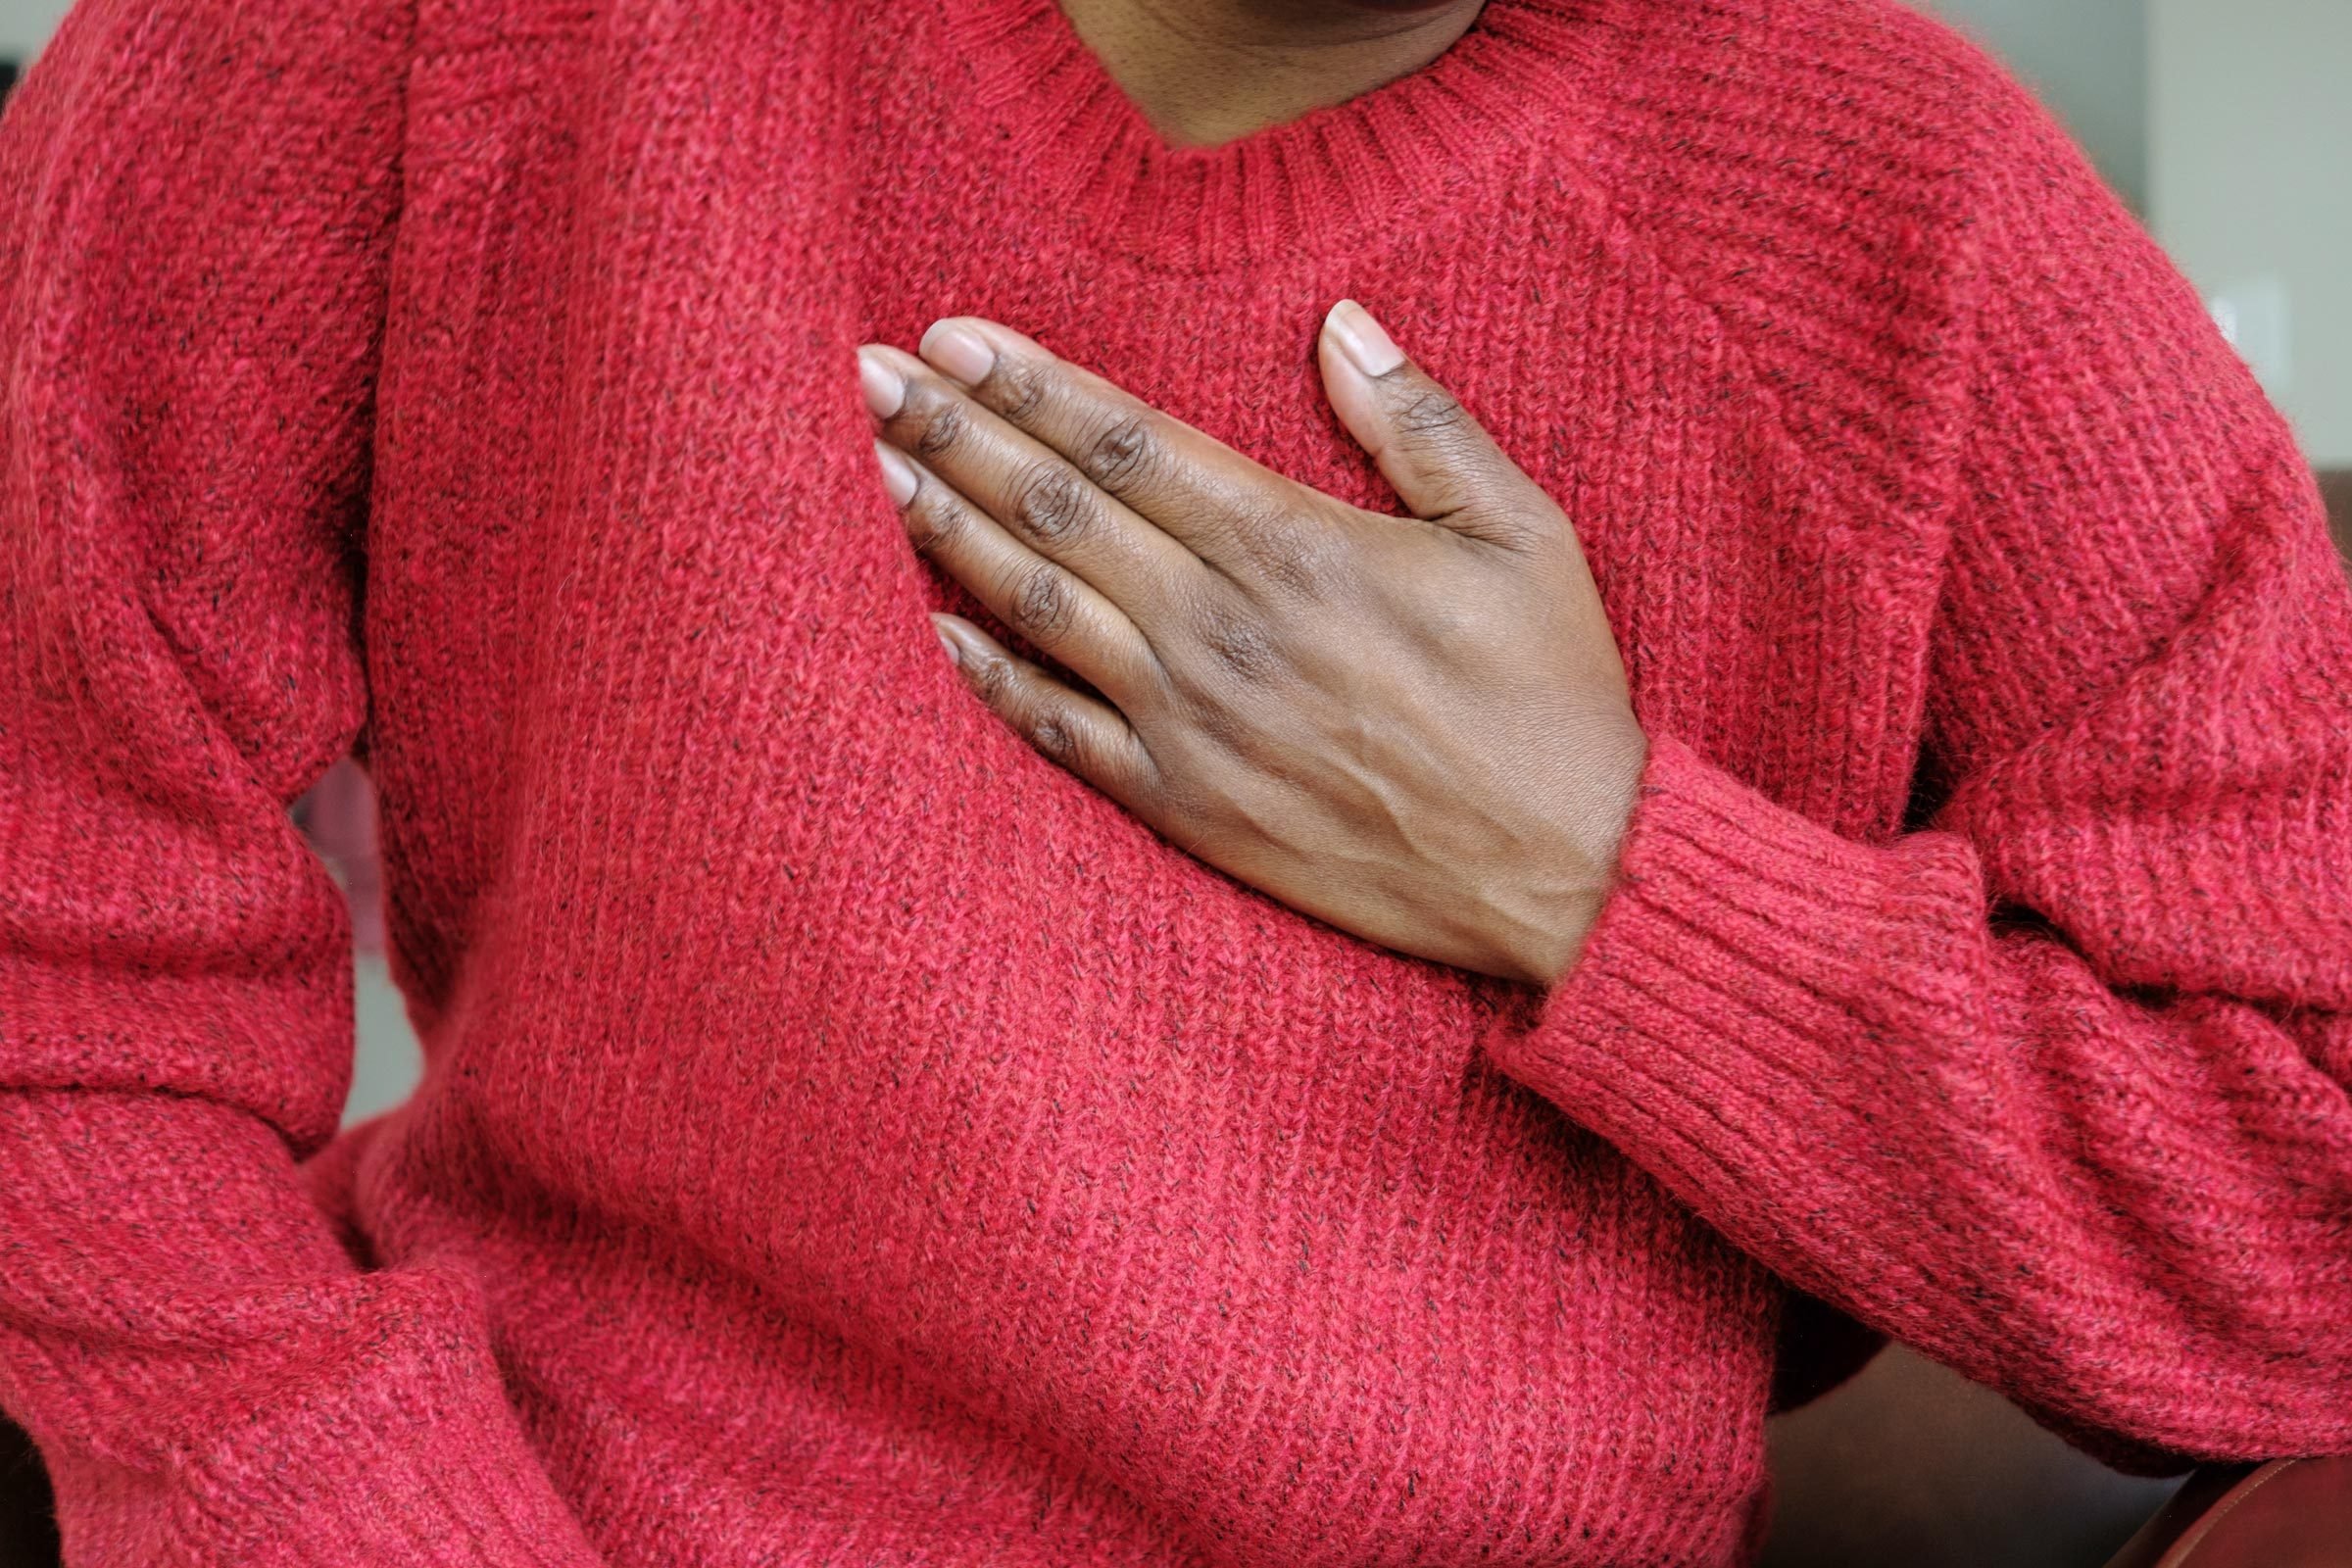 Experts: Here’s Why December Is the Biggest Month for Heart Attacks